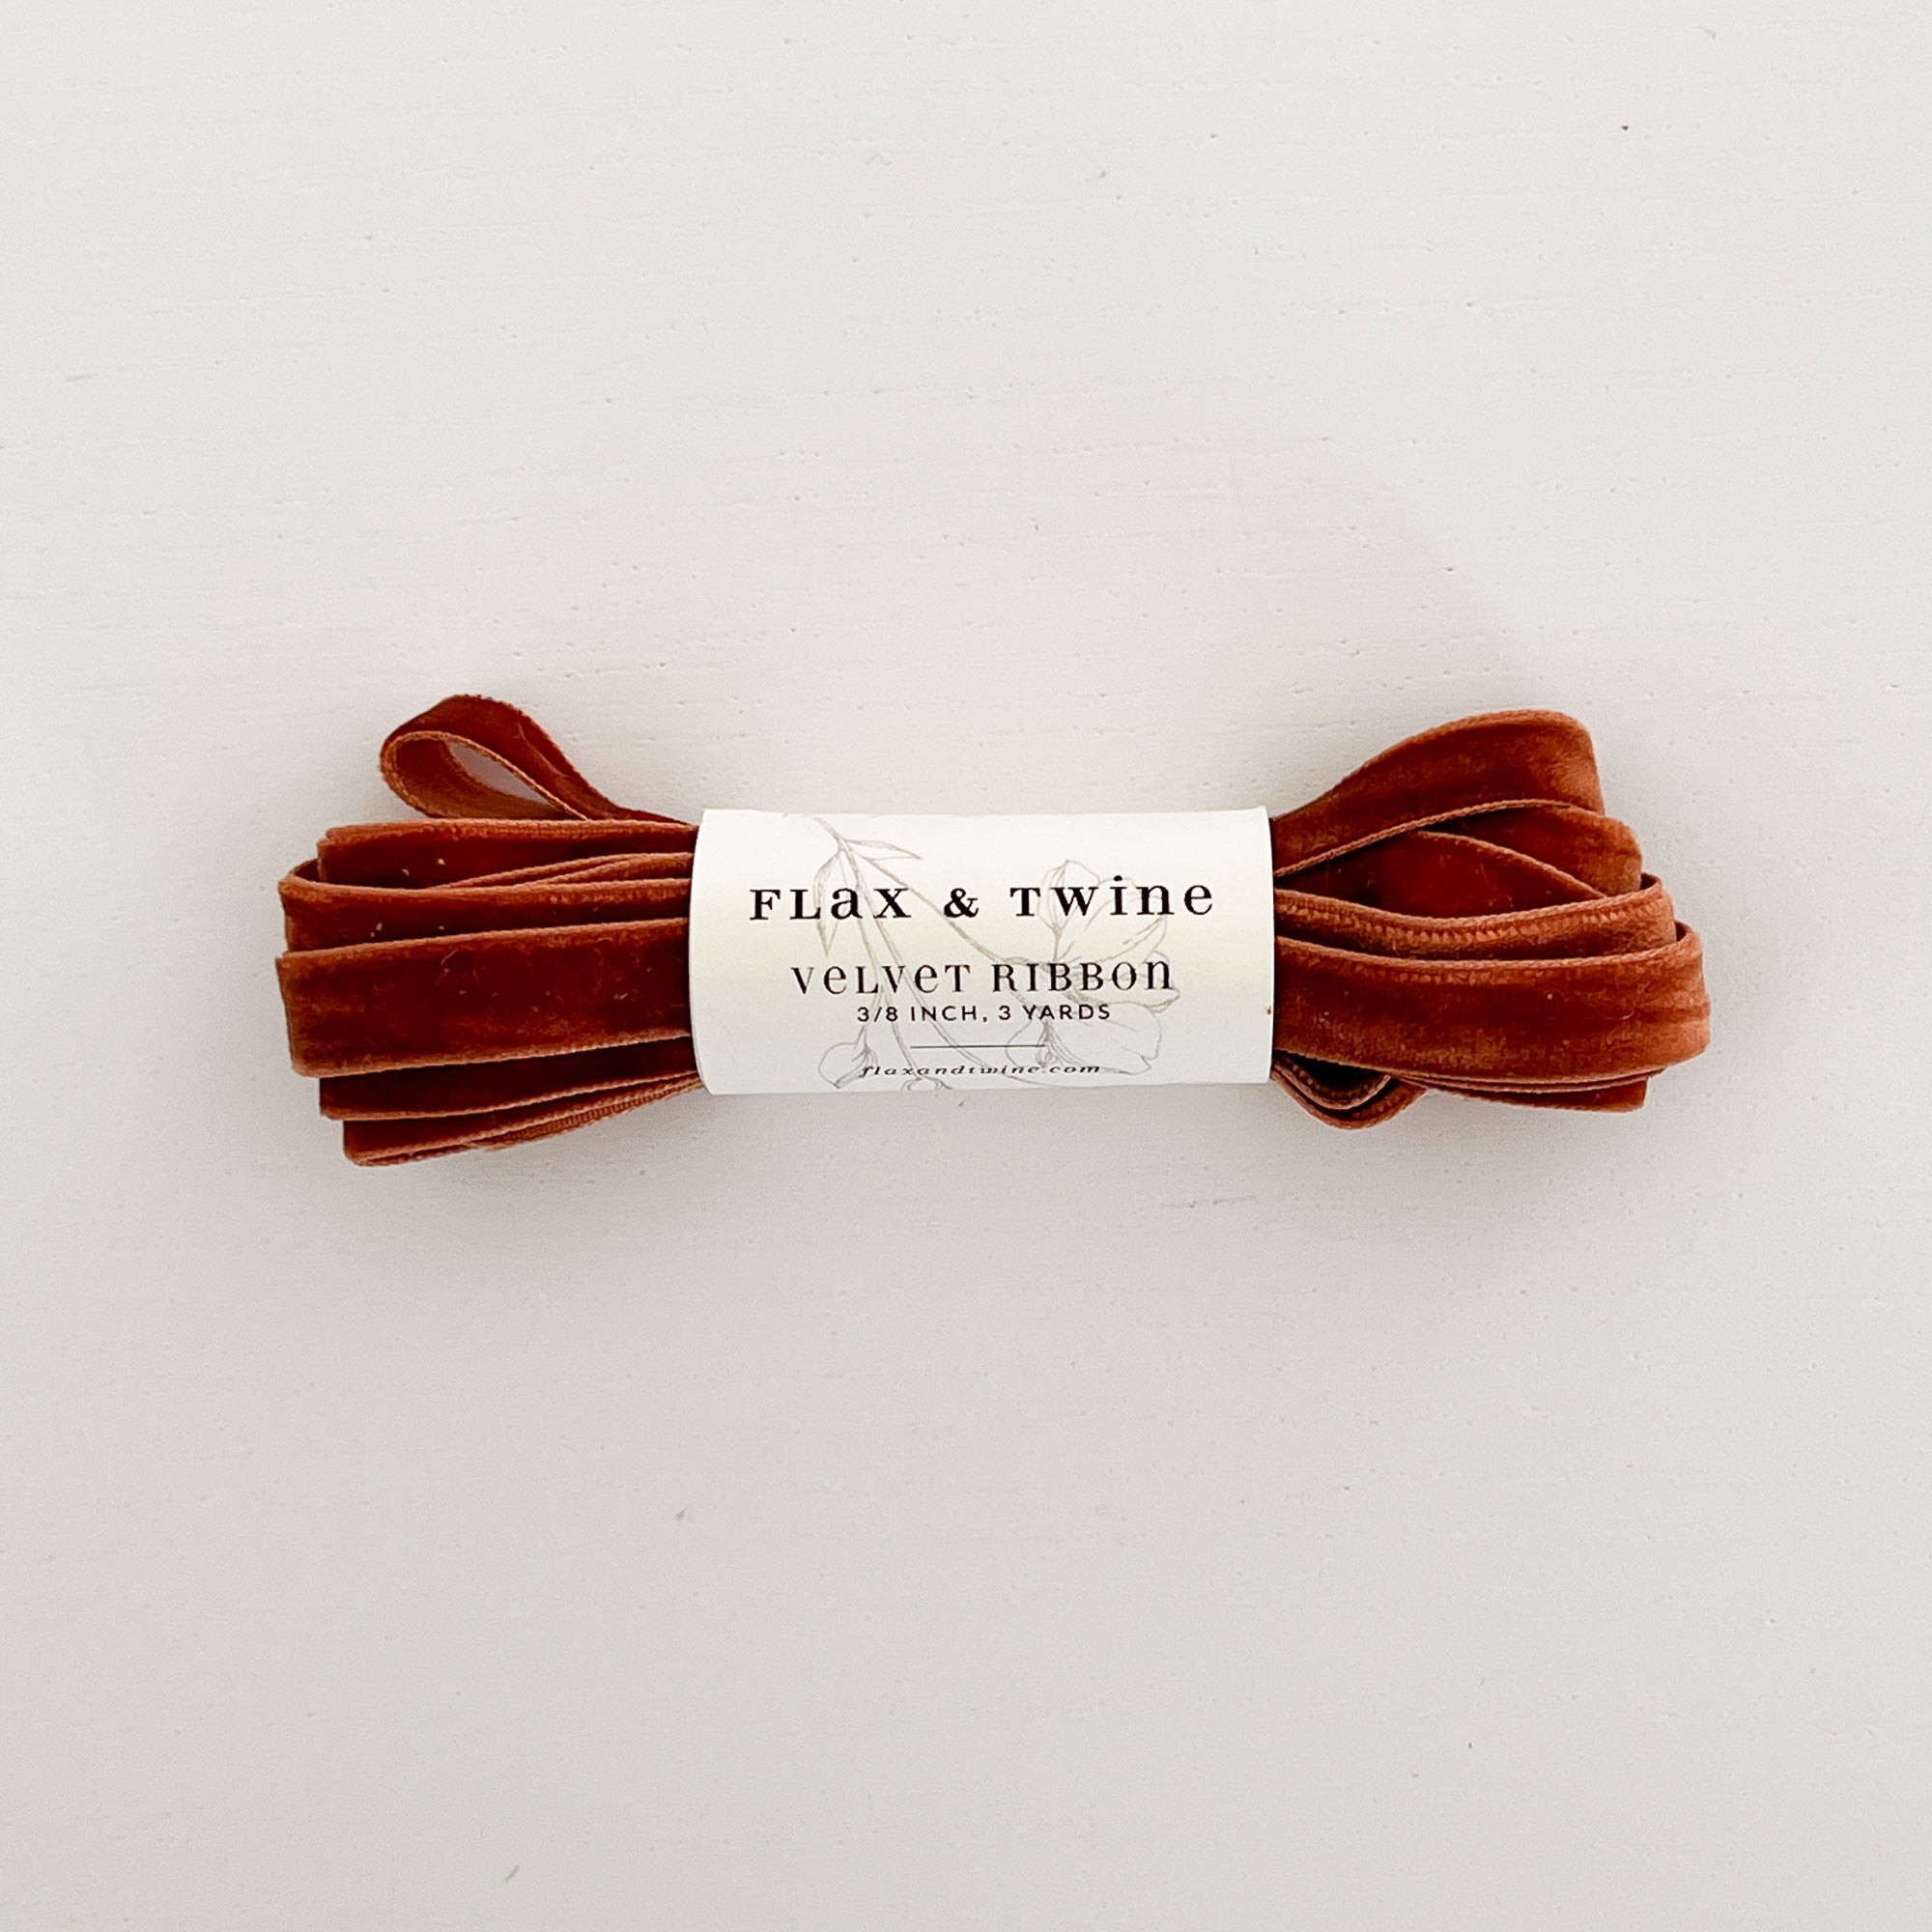 Flax & Twine Velvet Ribbon 3/8 Inch - The Websters